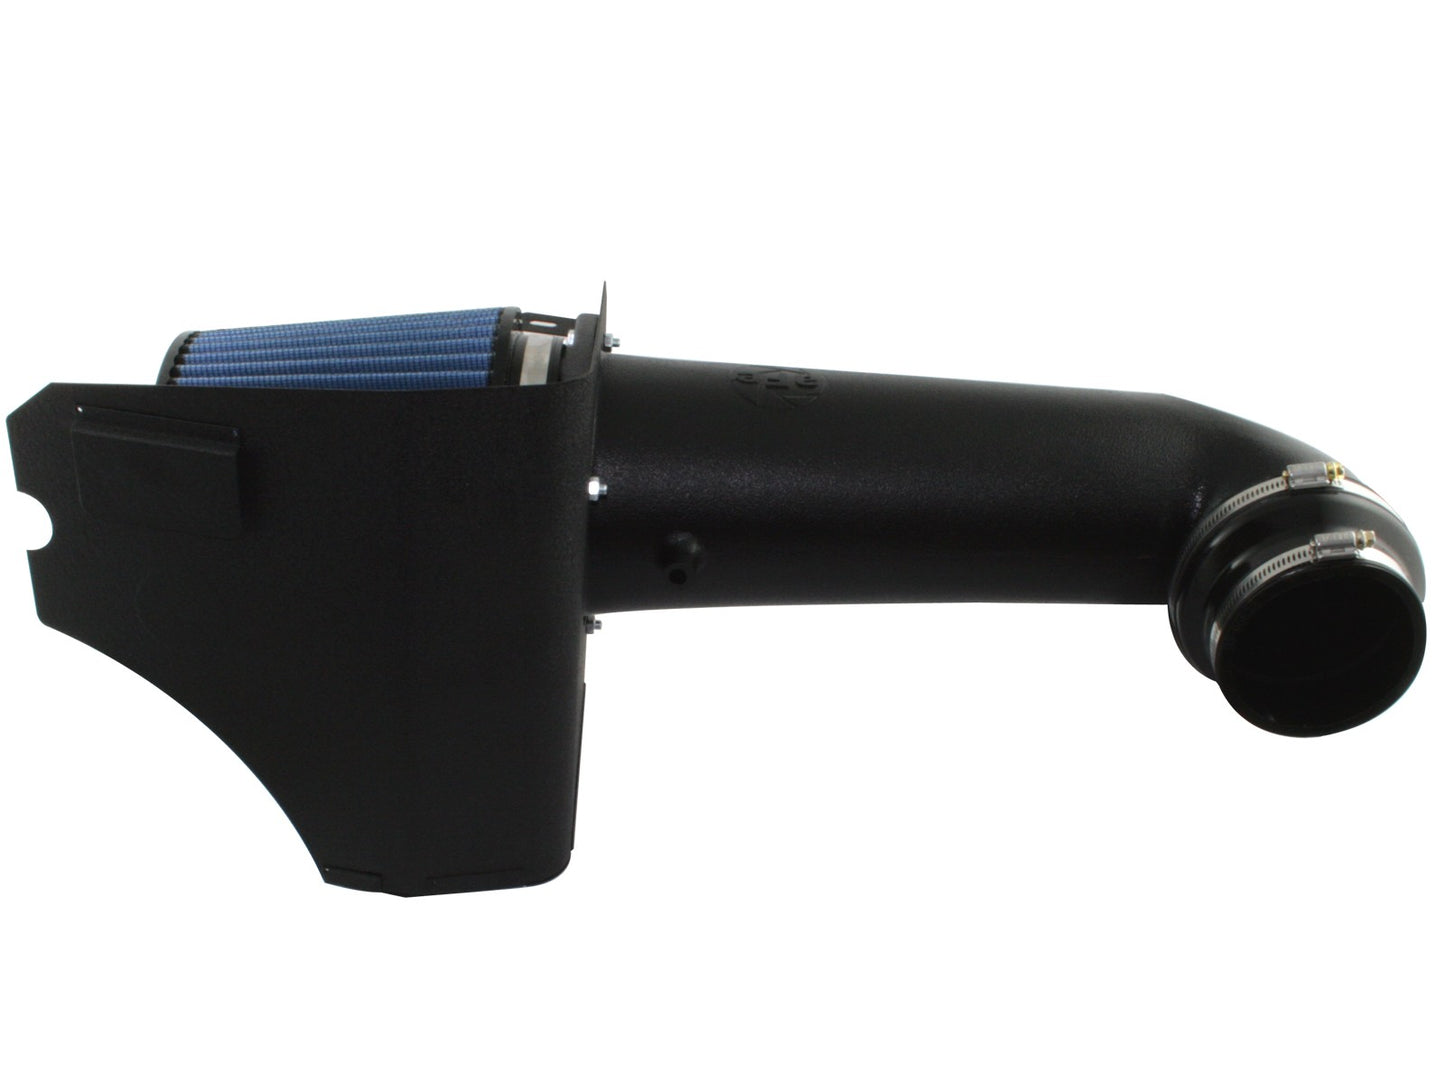 aFe Stage-2 Cold Air Intake 2005-2010 Challenger/Charger 5.7L/6.1L